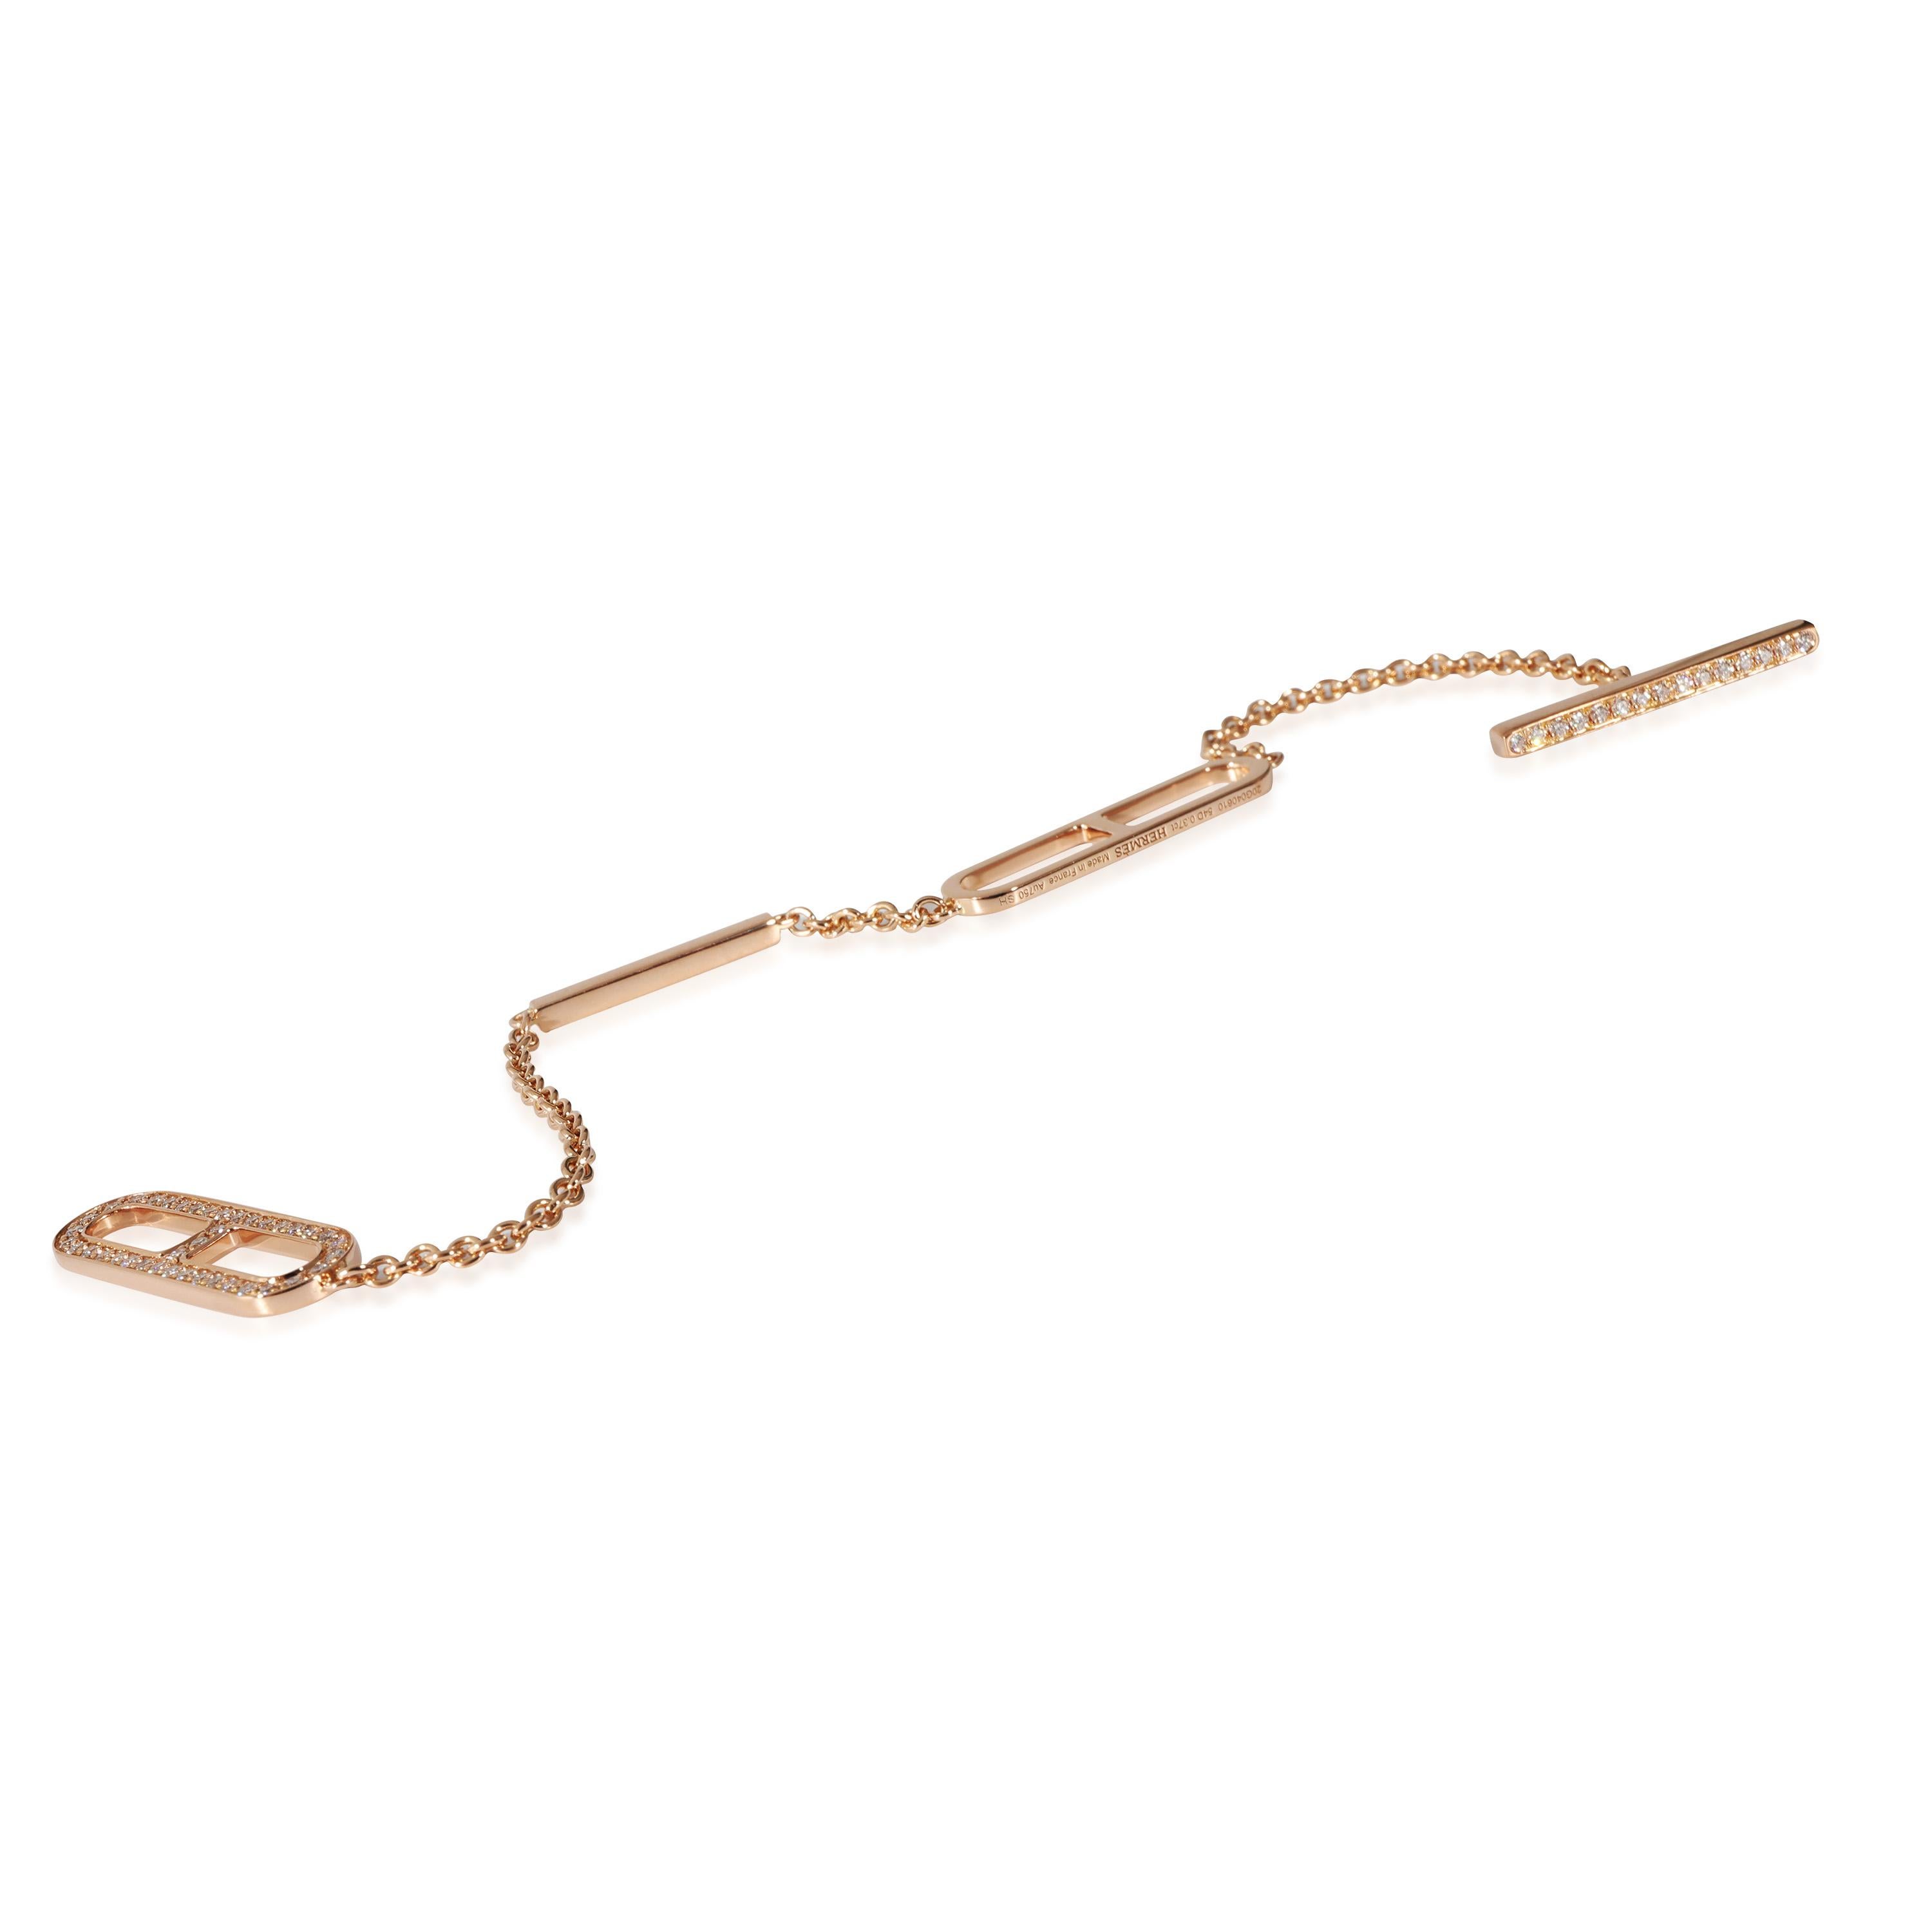 Hermes Ever Chaine D'Ancre Bracelet, Small Model in 18KT Rose Gold 0.37ctw

PRIMARY DETAILS
SKU: 132387
Listing Title: Hermes Ever Chaine D'Ancre Bracelet, Small Model in 18KT Rose Gold 0.37ctw
Condition Description: Retails for 7850 USD. In